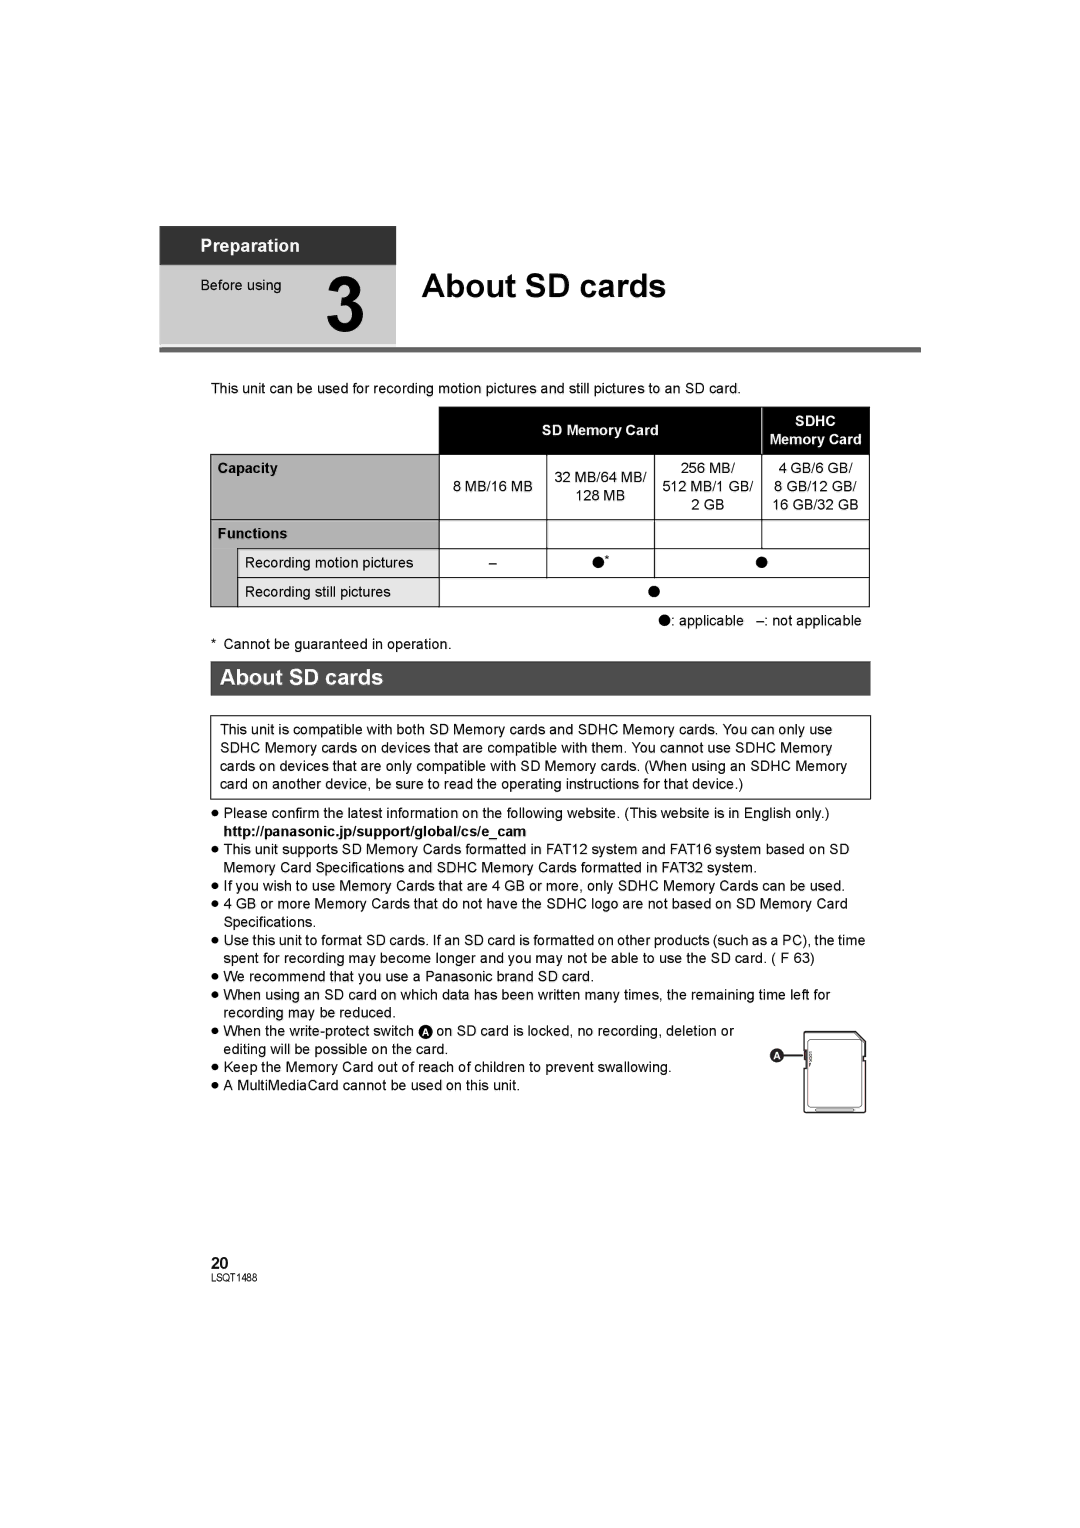 Panasonic SDR-S26PC operating instructions Before using 3 About SD cards, SD Memory Card, Capacity, Functions 